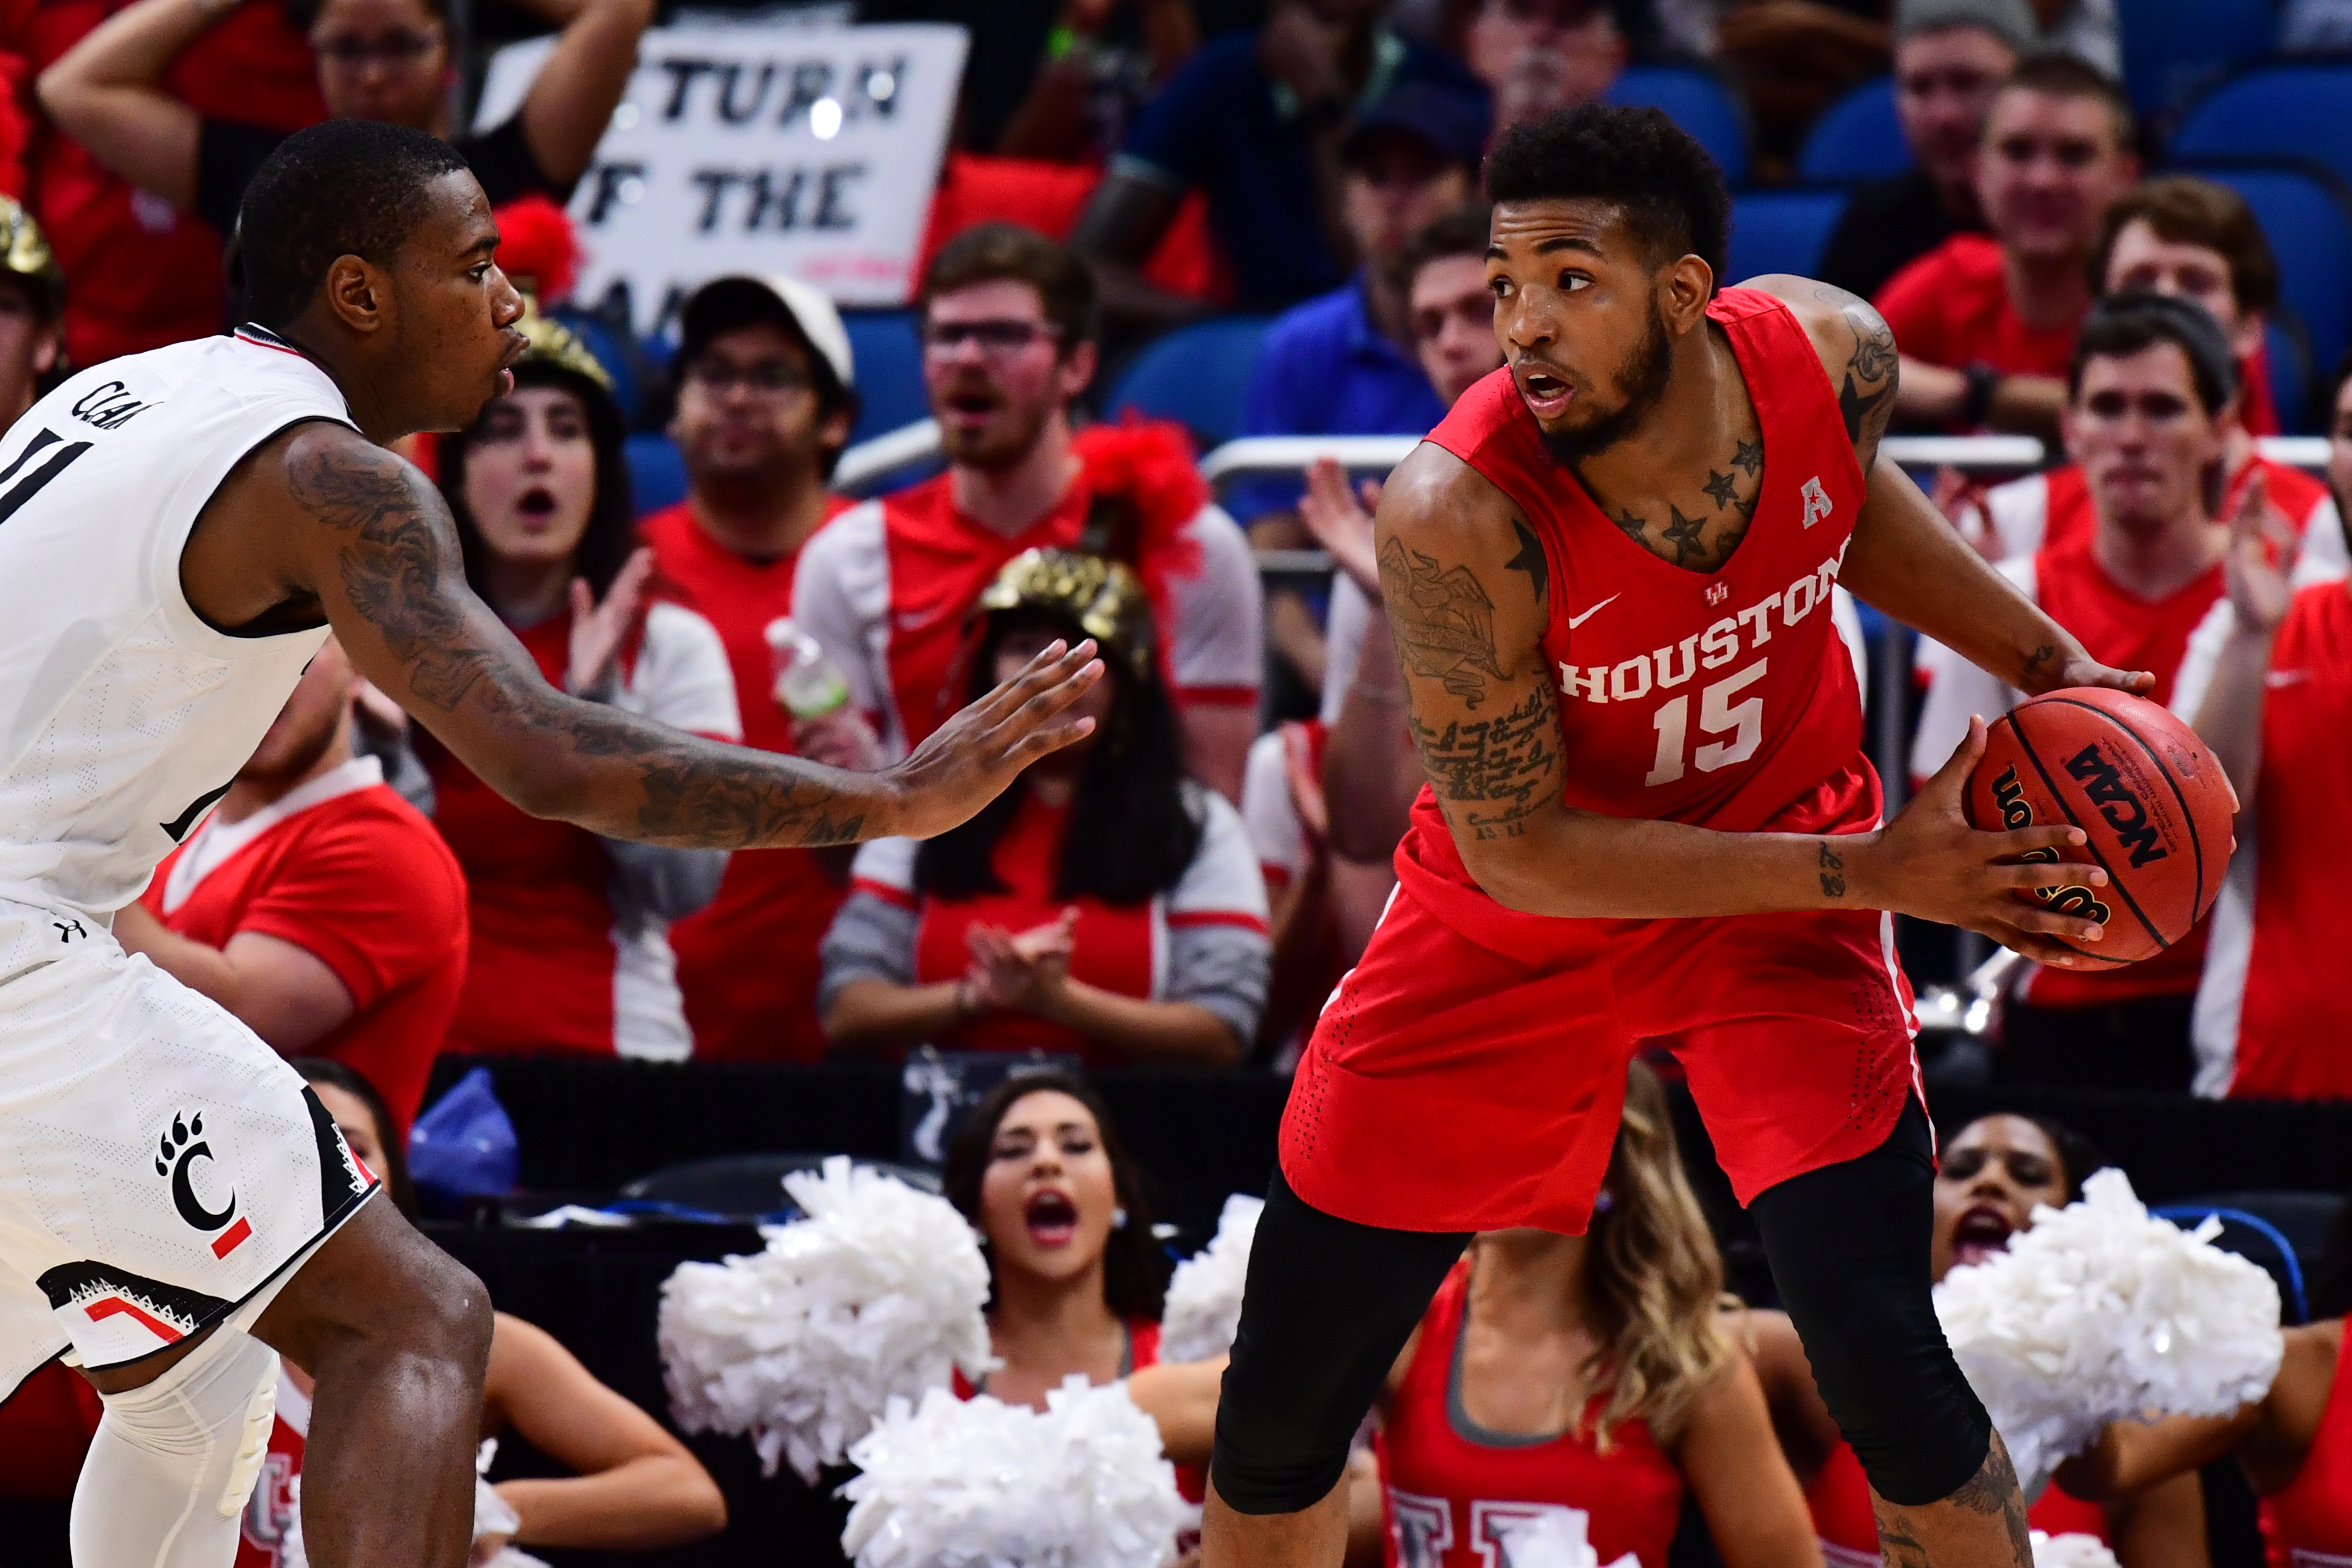 2018 American Athletic Conference Men's Basketball Championship - Houston vs. Cincinnati in the Semifinals at the Amway Center in Orlando, Florida